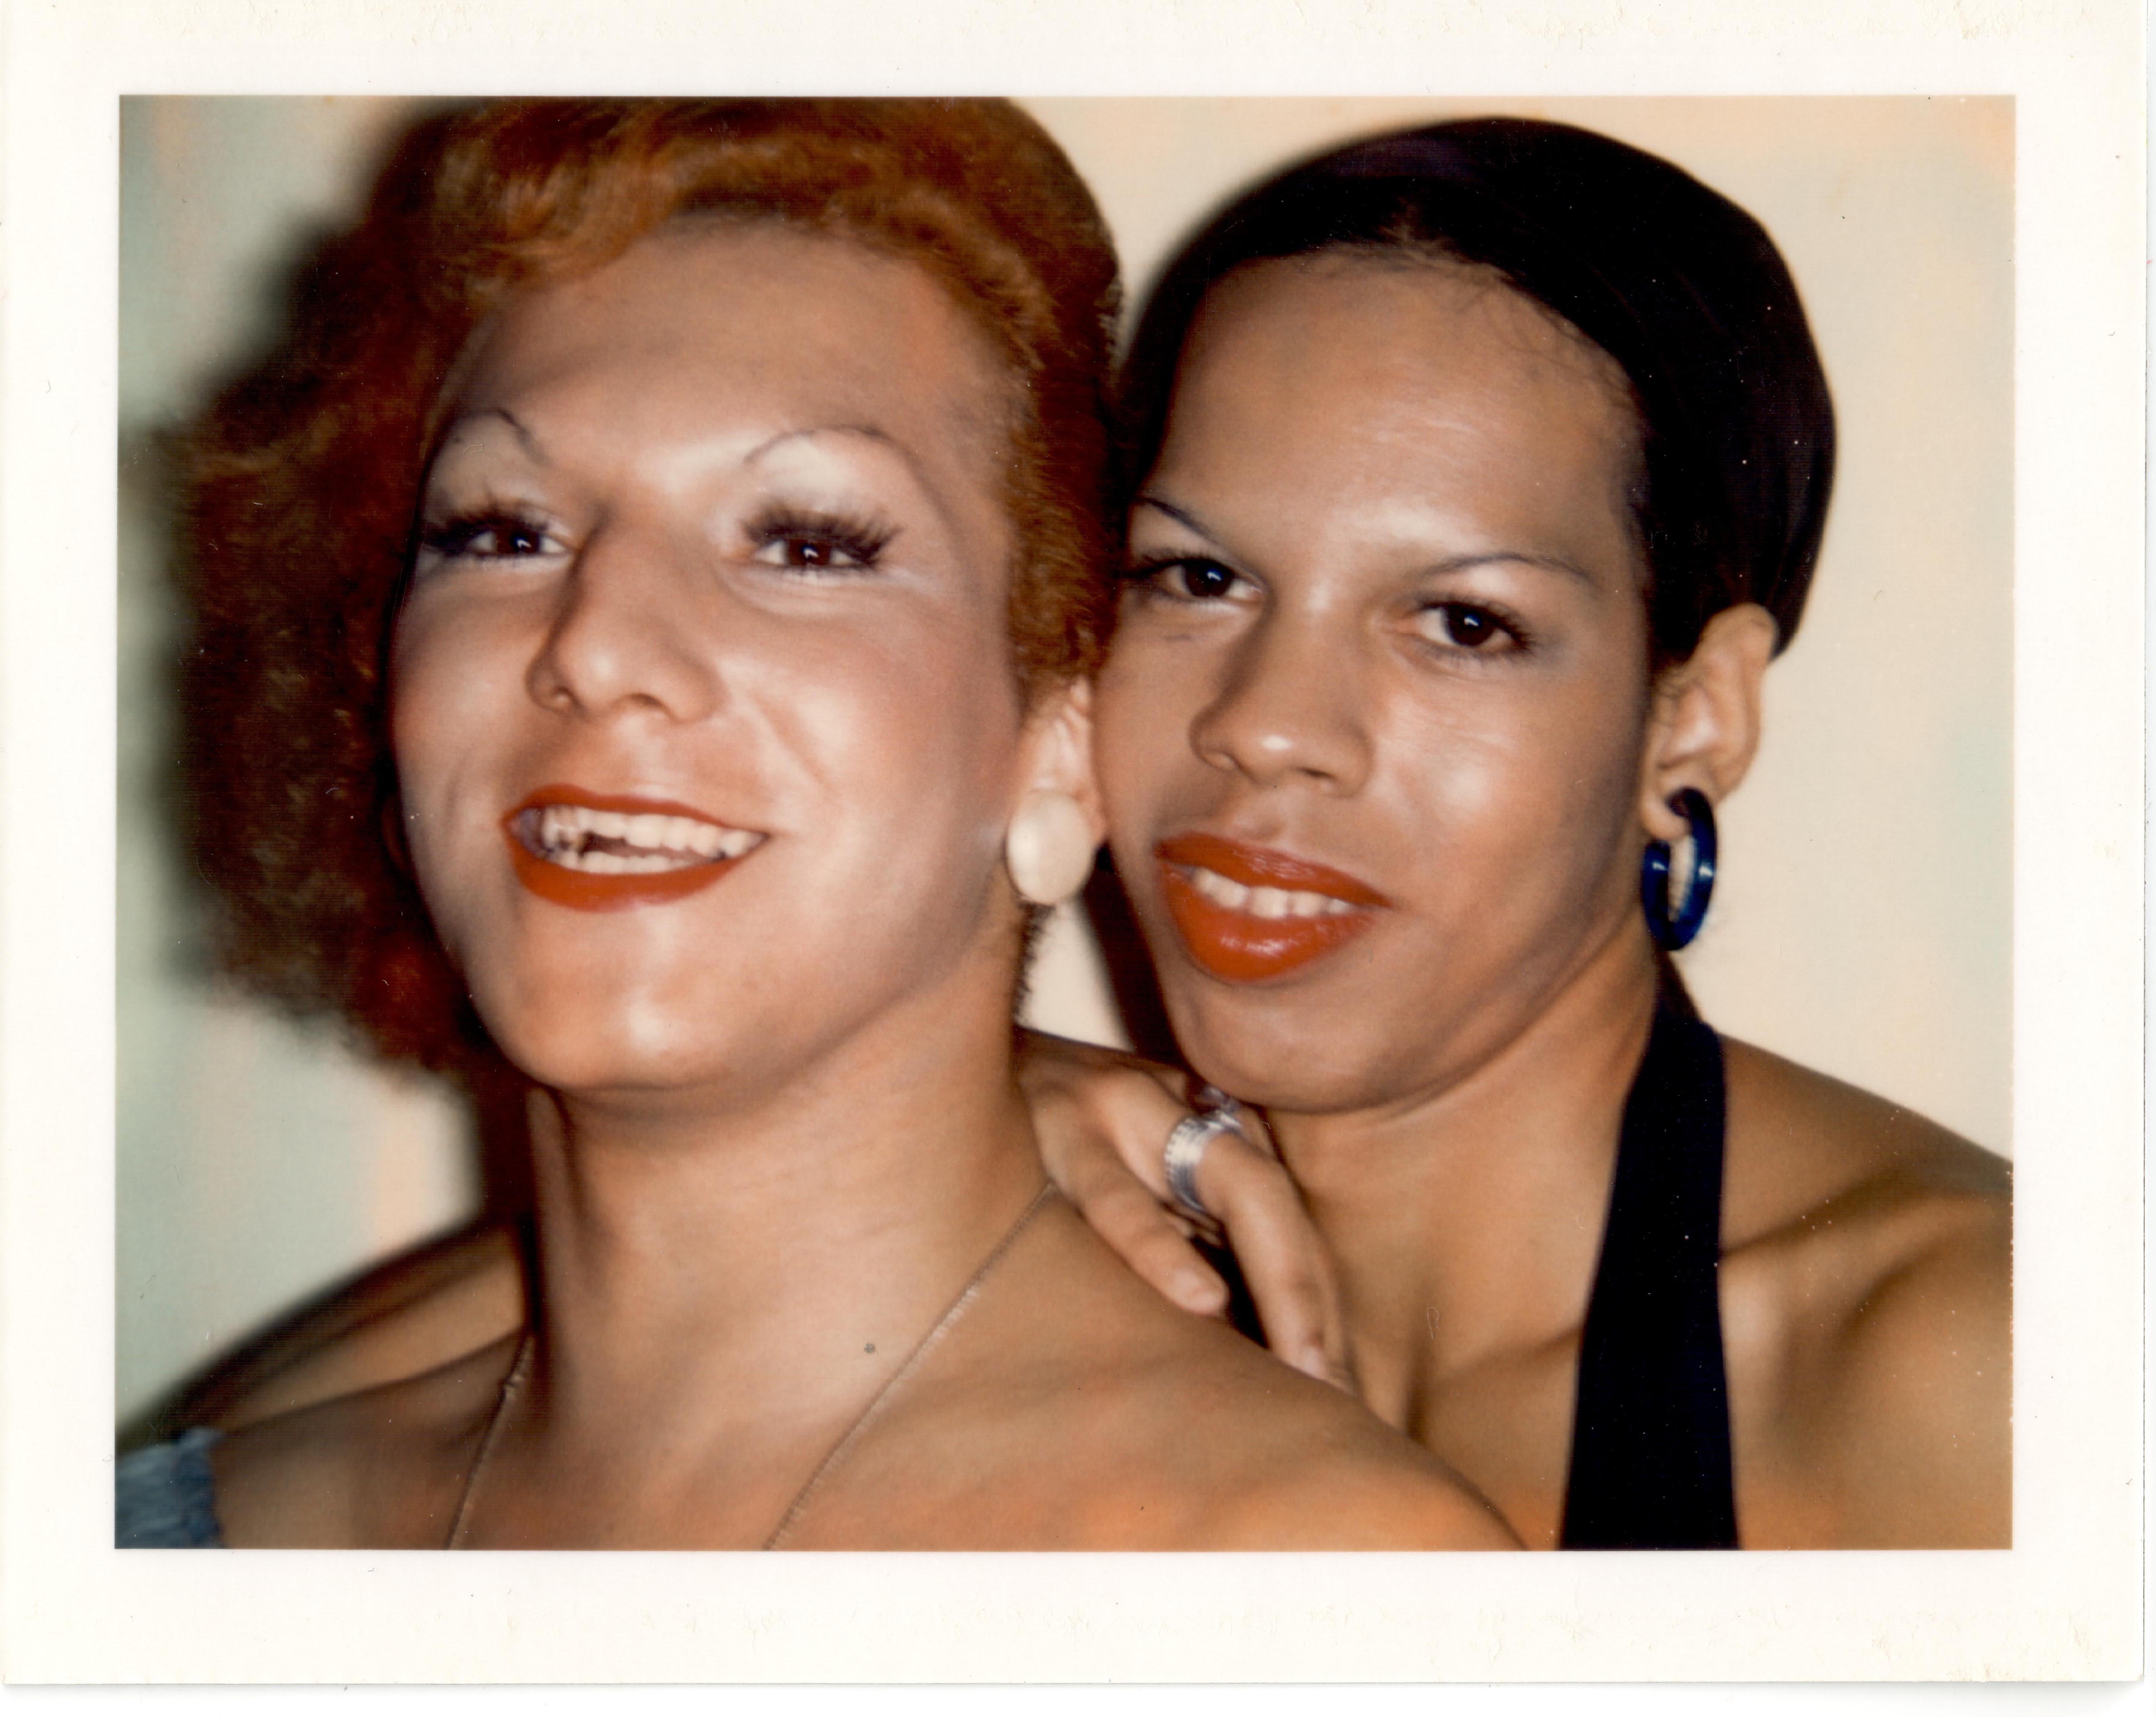 Andy Warhol Color Photograph - Ladies and Gentlemen (Lurdes and Ivette)